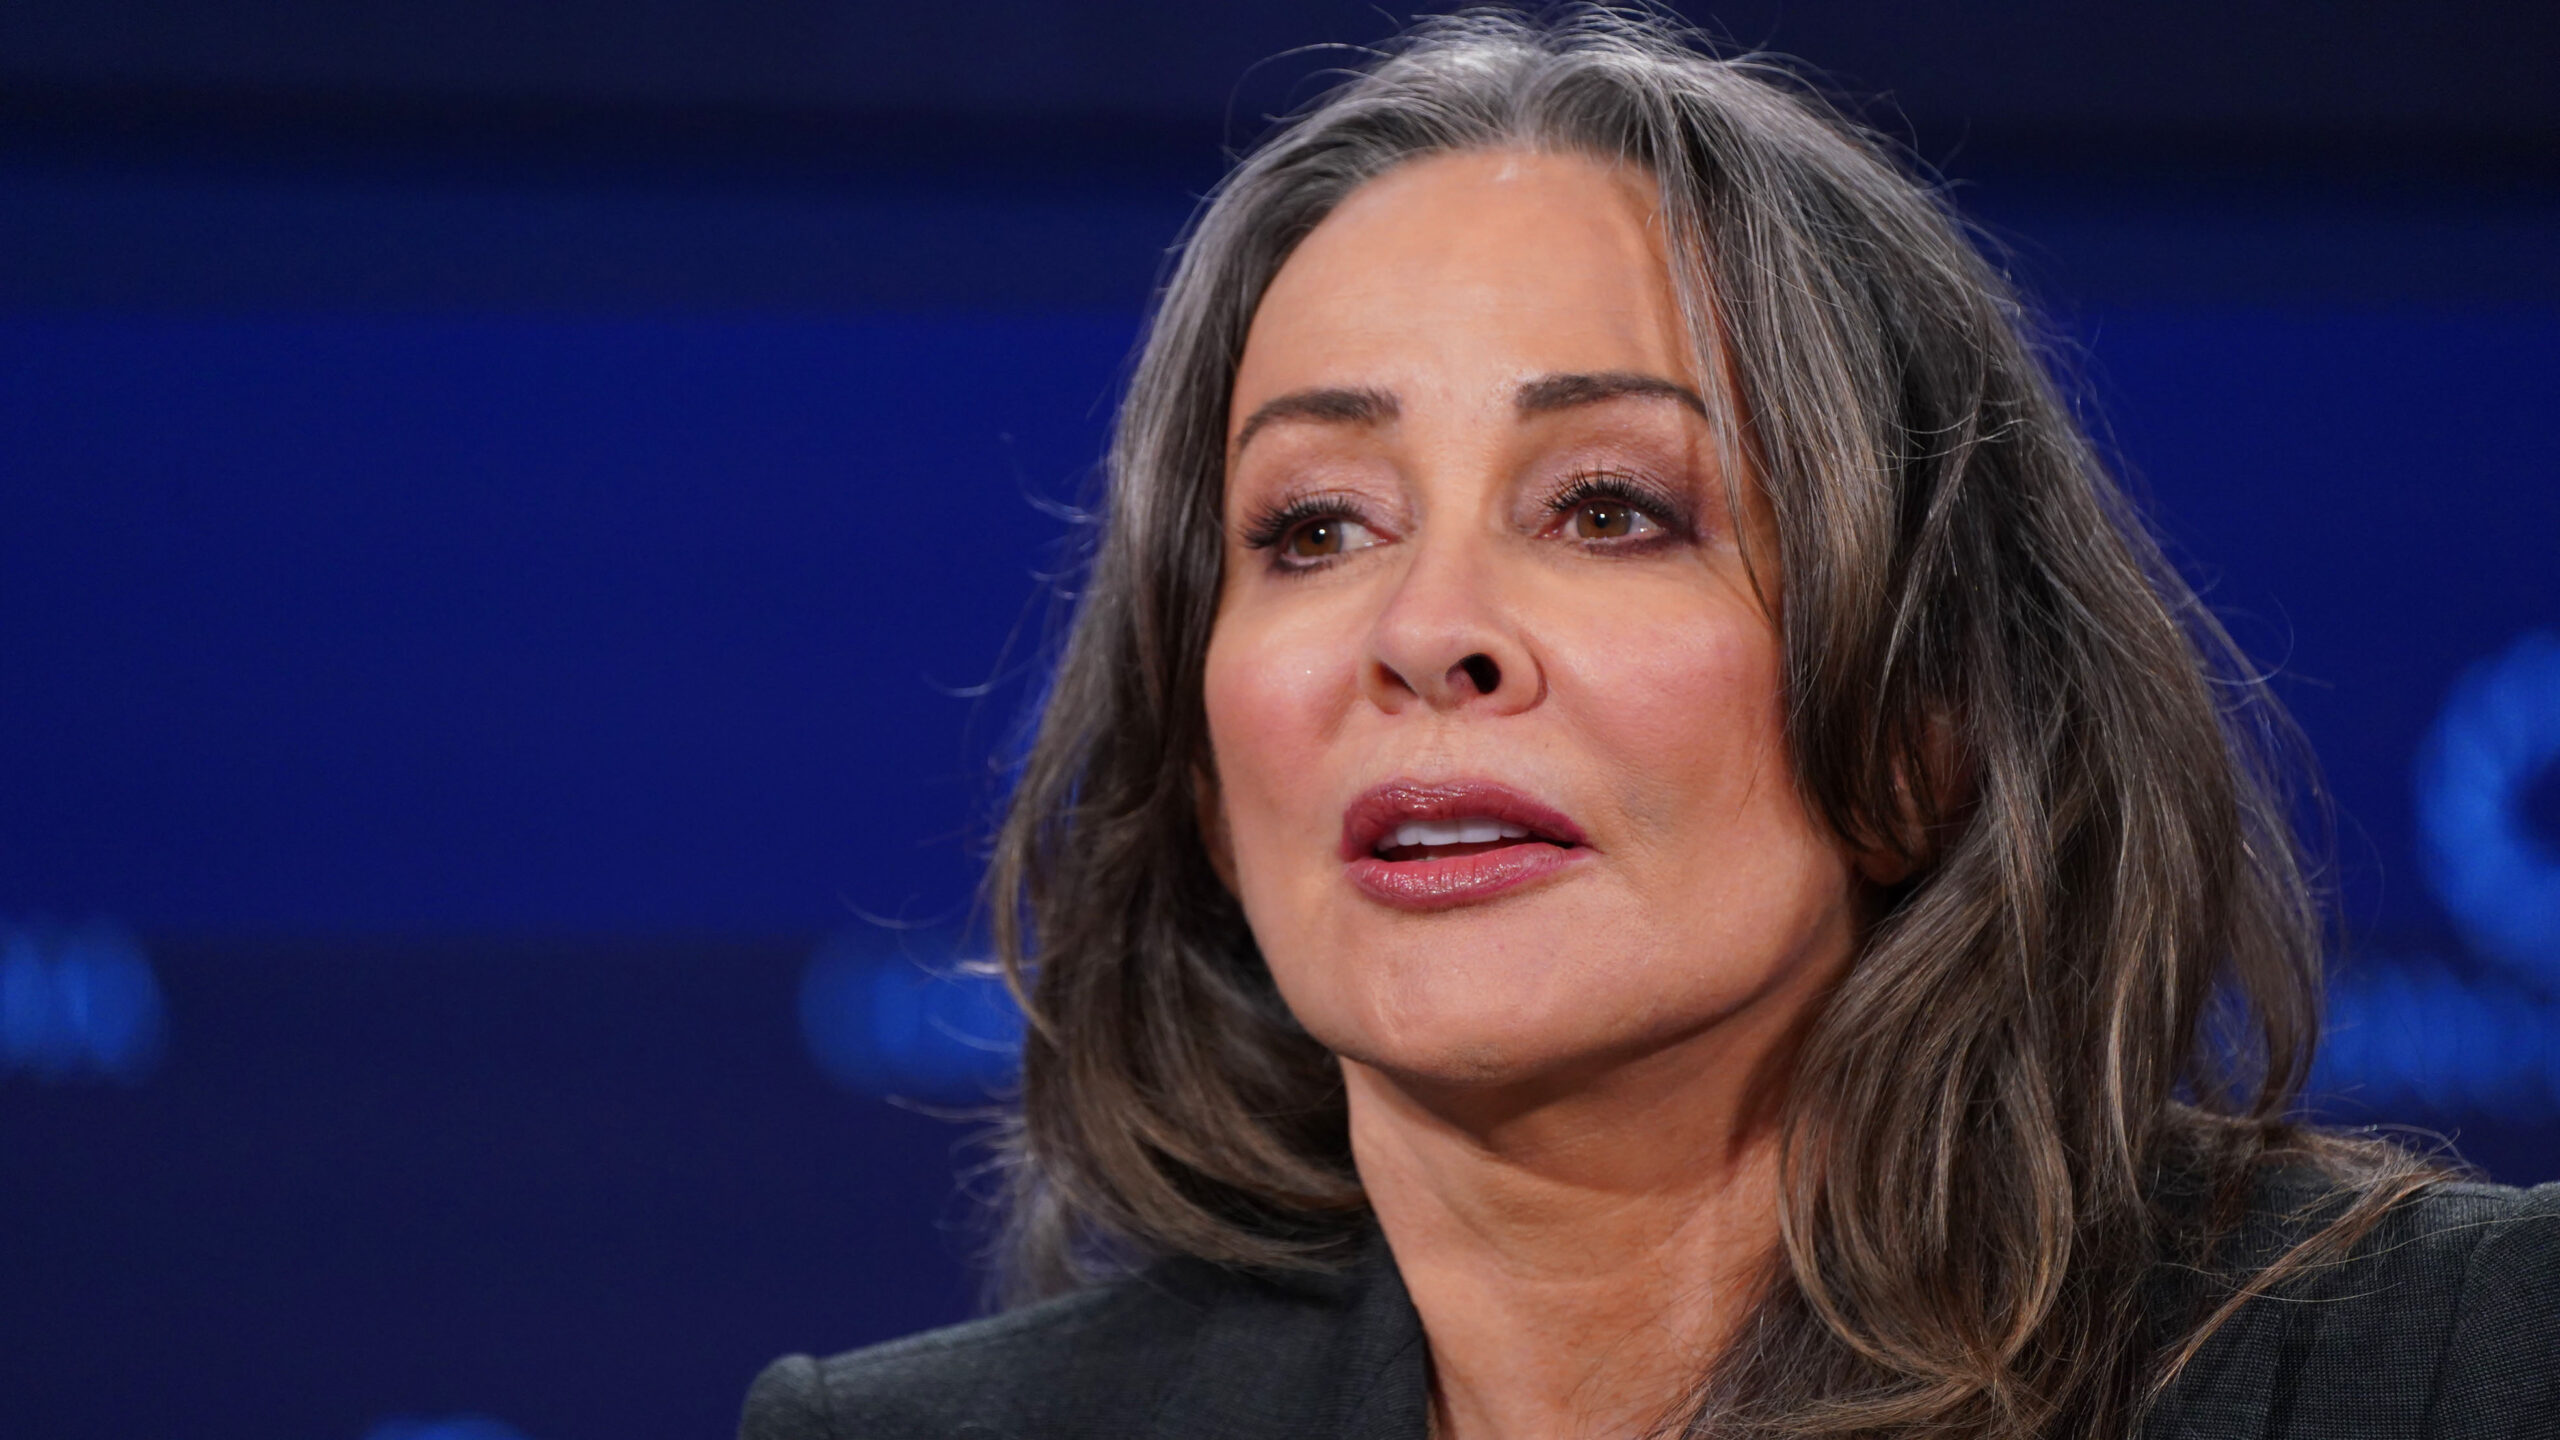 Patricia Heaton concerned about growing anti-Semitism, Hamas backing